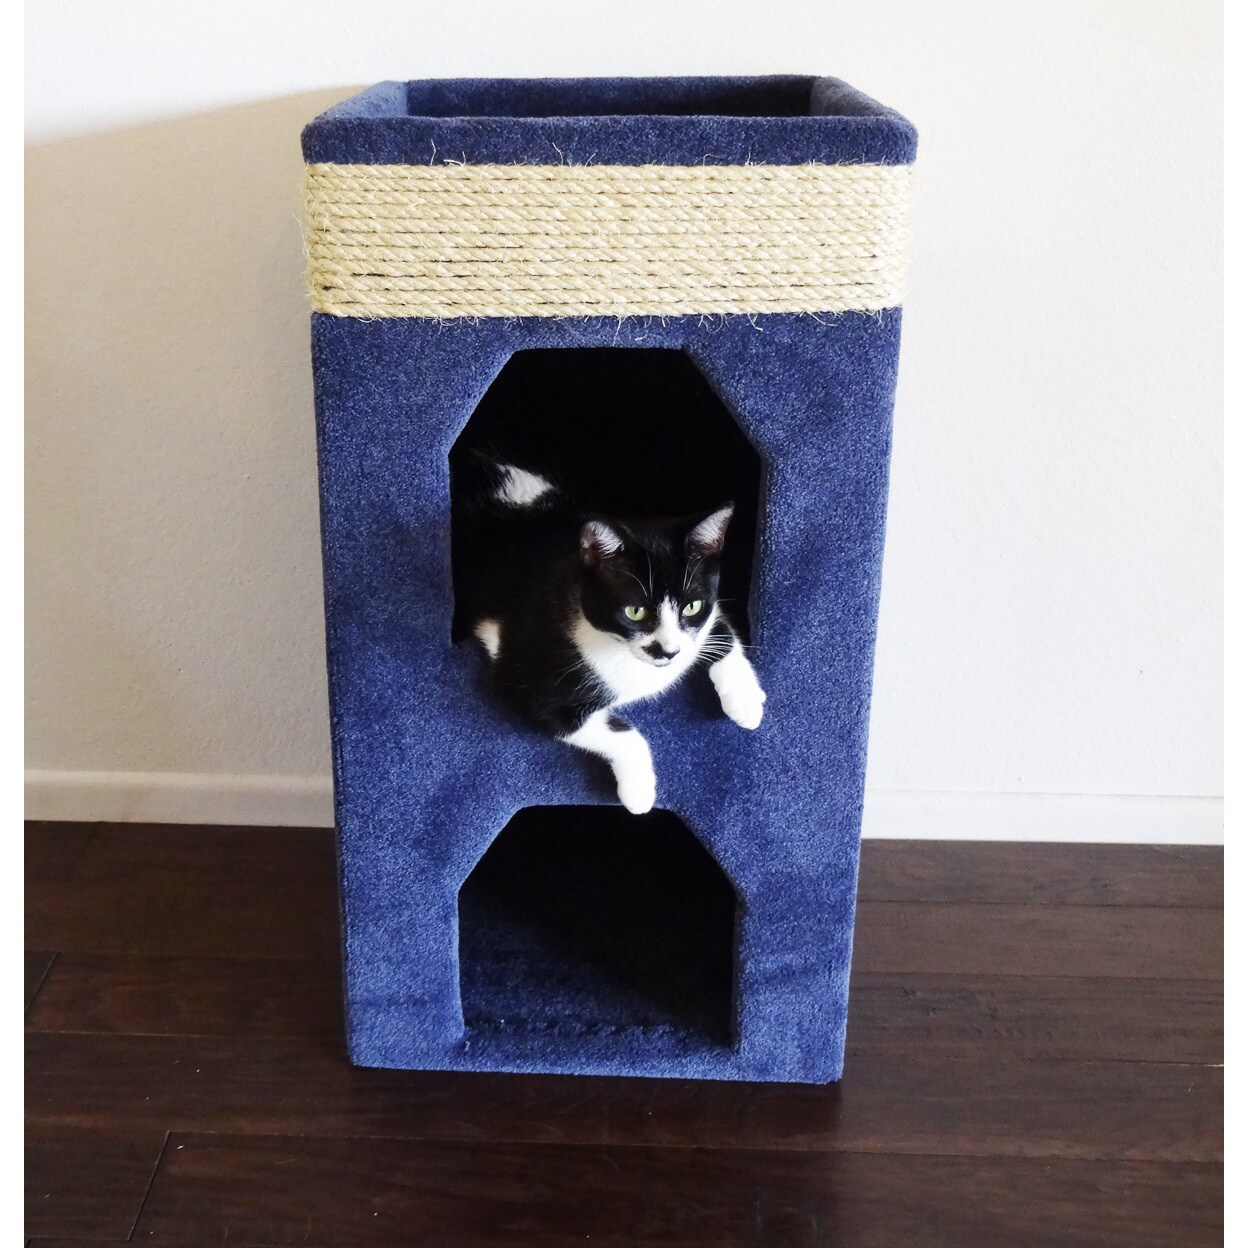 New Cat Condos Double Cat Tower Today $83.49 4.7 (9 reviews)